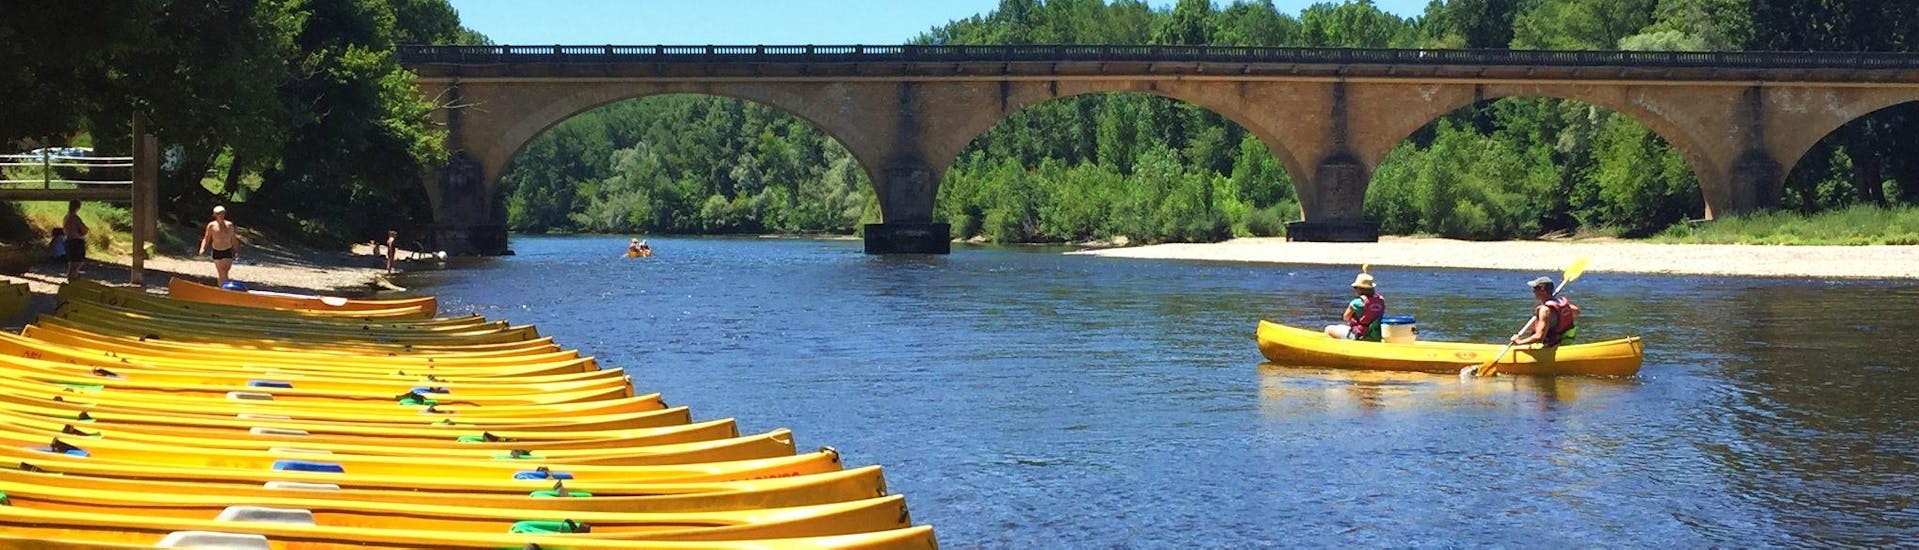 Holidaymakers are paddling on the Dordogne River during their 19 km canoe trip with Canoës Loisirs Dordogne.